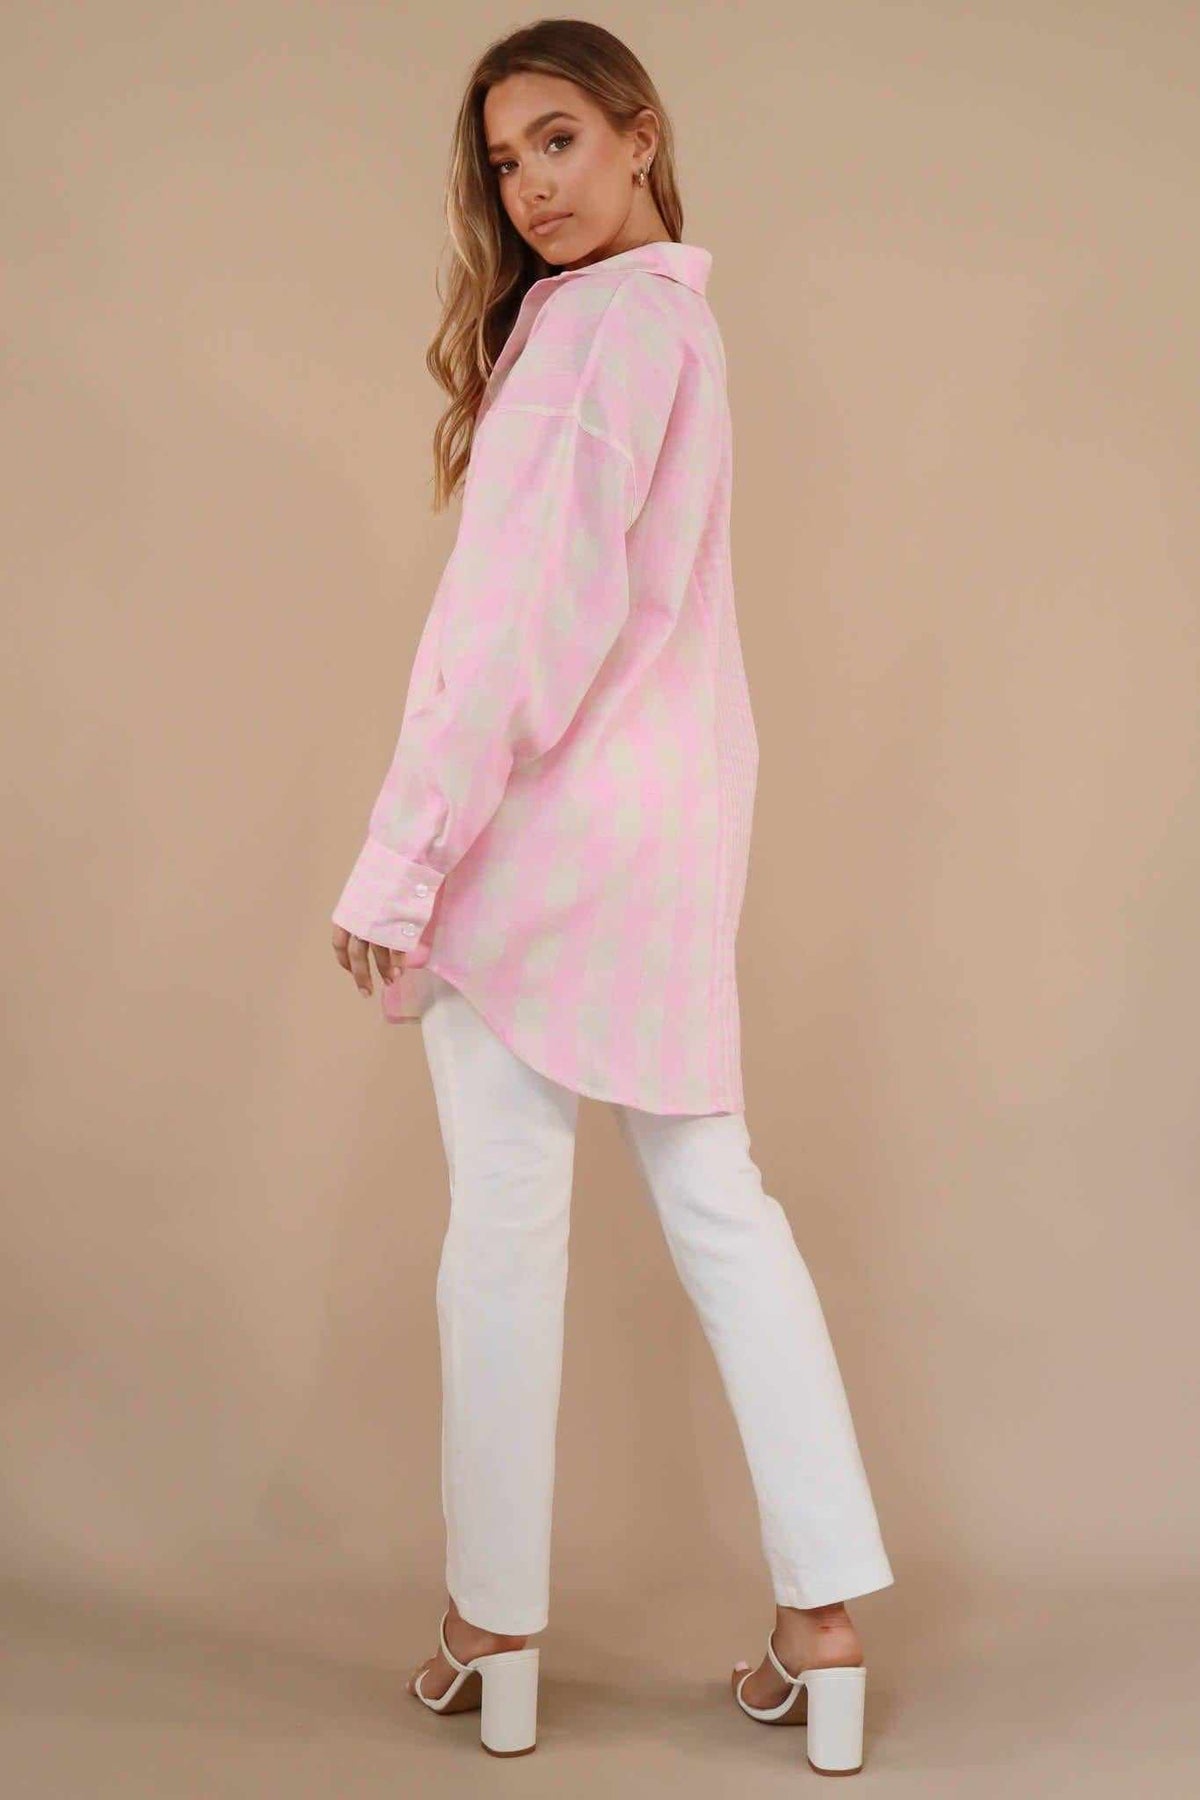 Devany Top, COTTON &amp; LINEN, COTTON AND LINEN, LINEN &amp; COTTON, LINEN AND COTTON, LONG SLEEVE, PINK, Sale, TOP, TOPS, Our New Devany Top Is Now Only $66.00 Exclusive At Mishkah, Our New Devany Top is now only $66.00-We Have The Latest Women&#39;s Tops @ Mishkah Online Fashion Boutique-MISHKAH